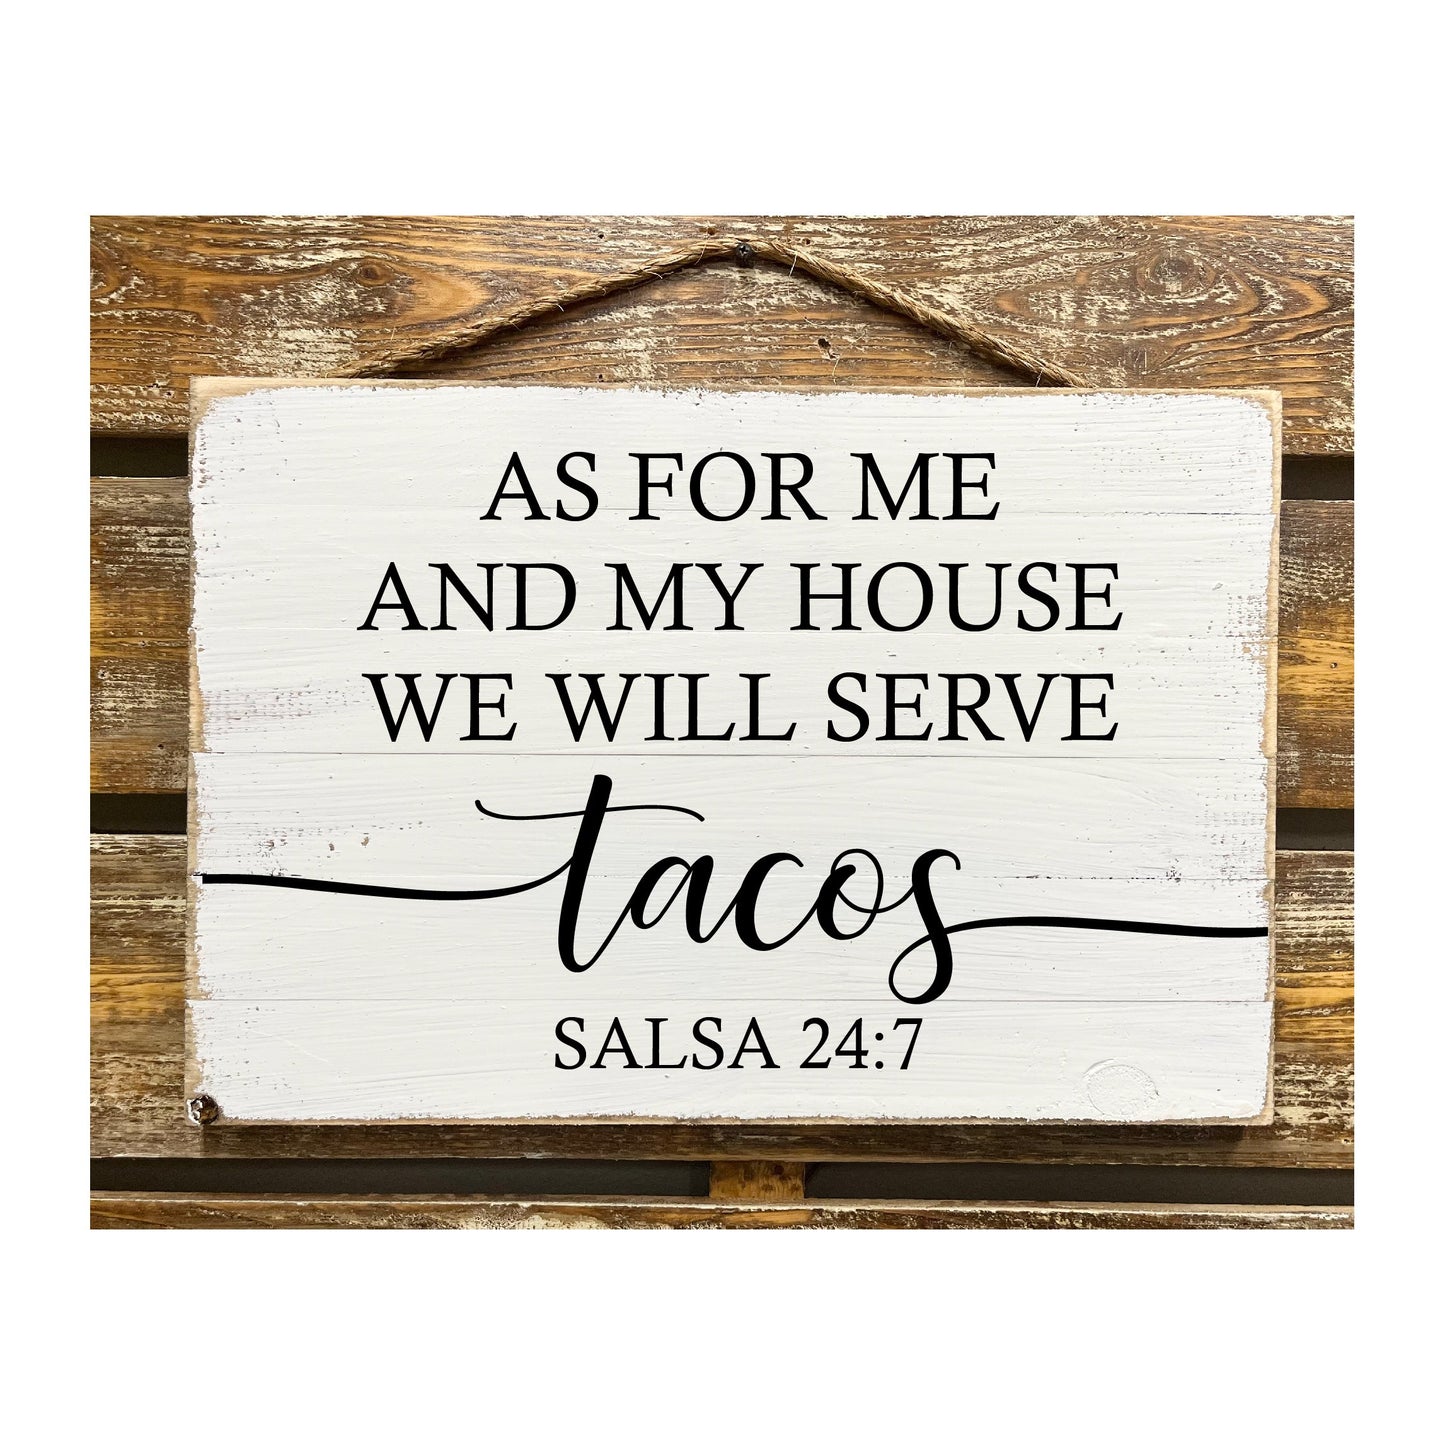 As For Me And My House We Will Serve Tacos Salsa 24:7